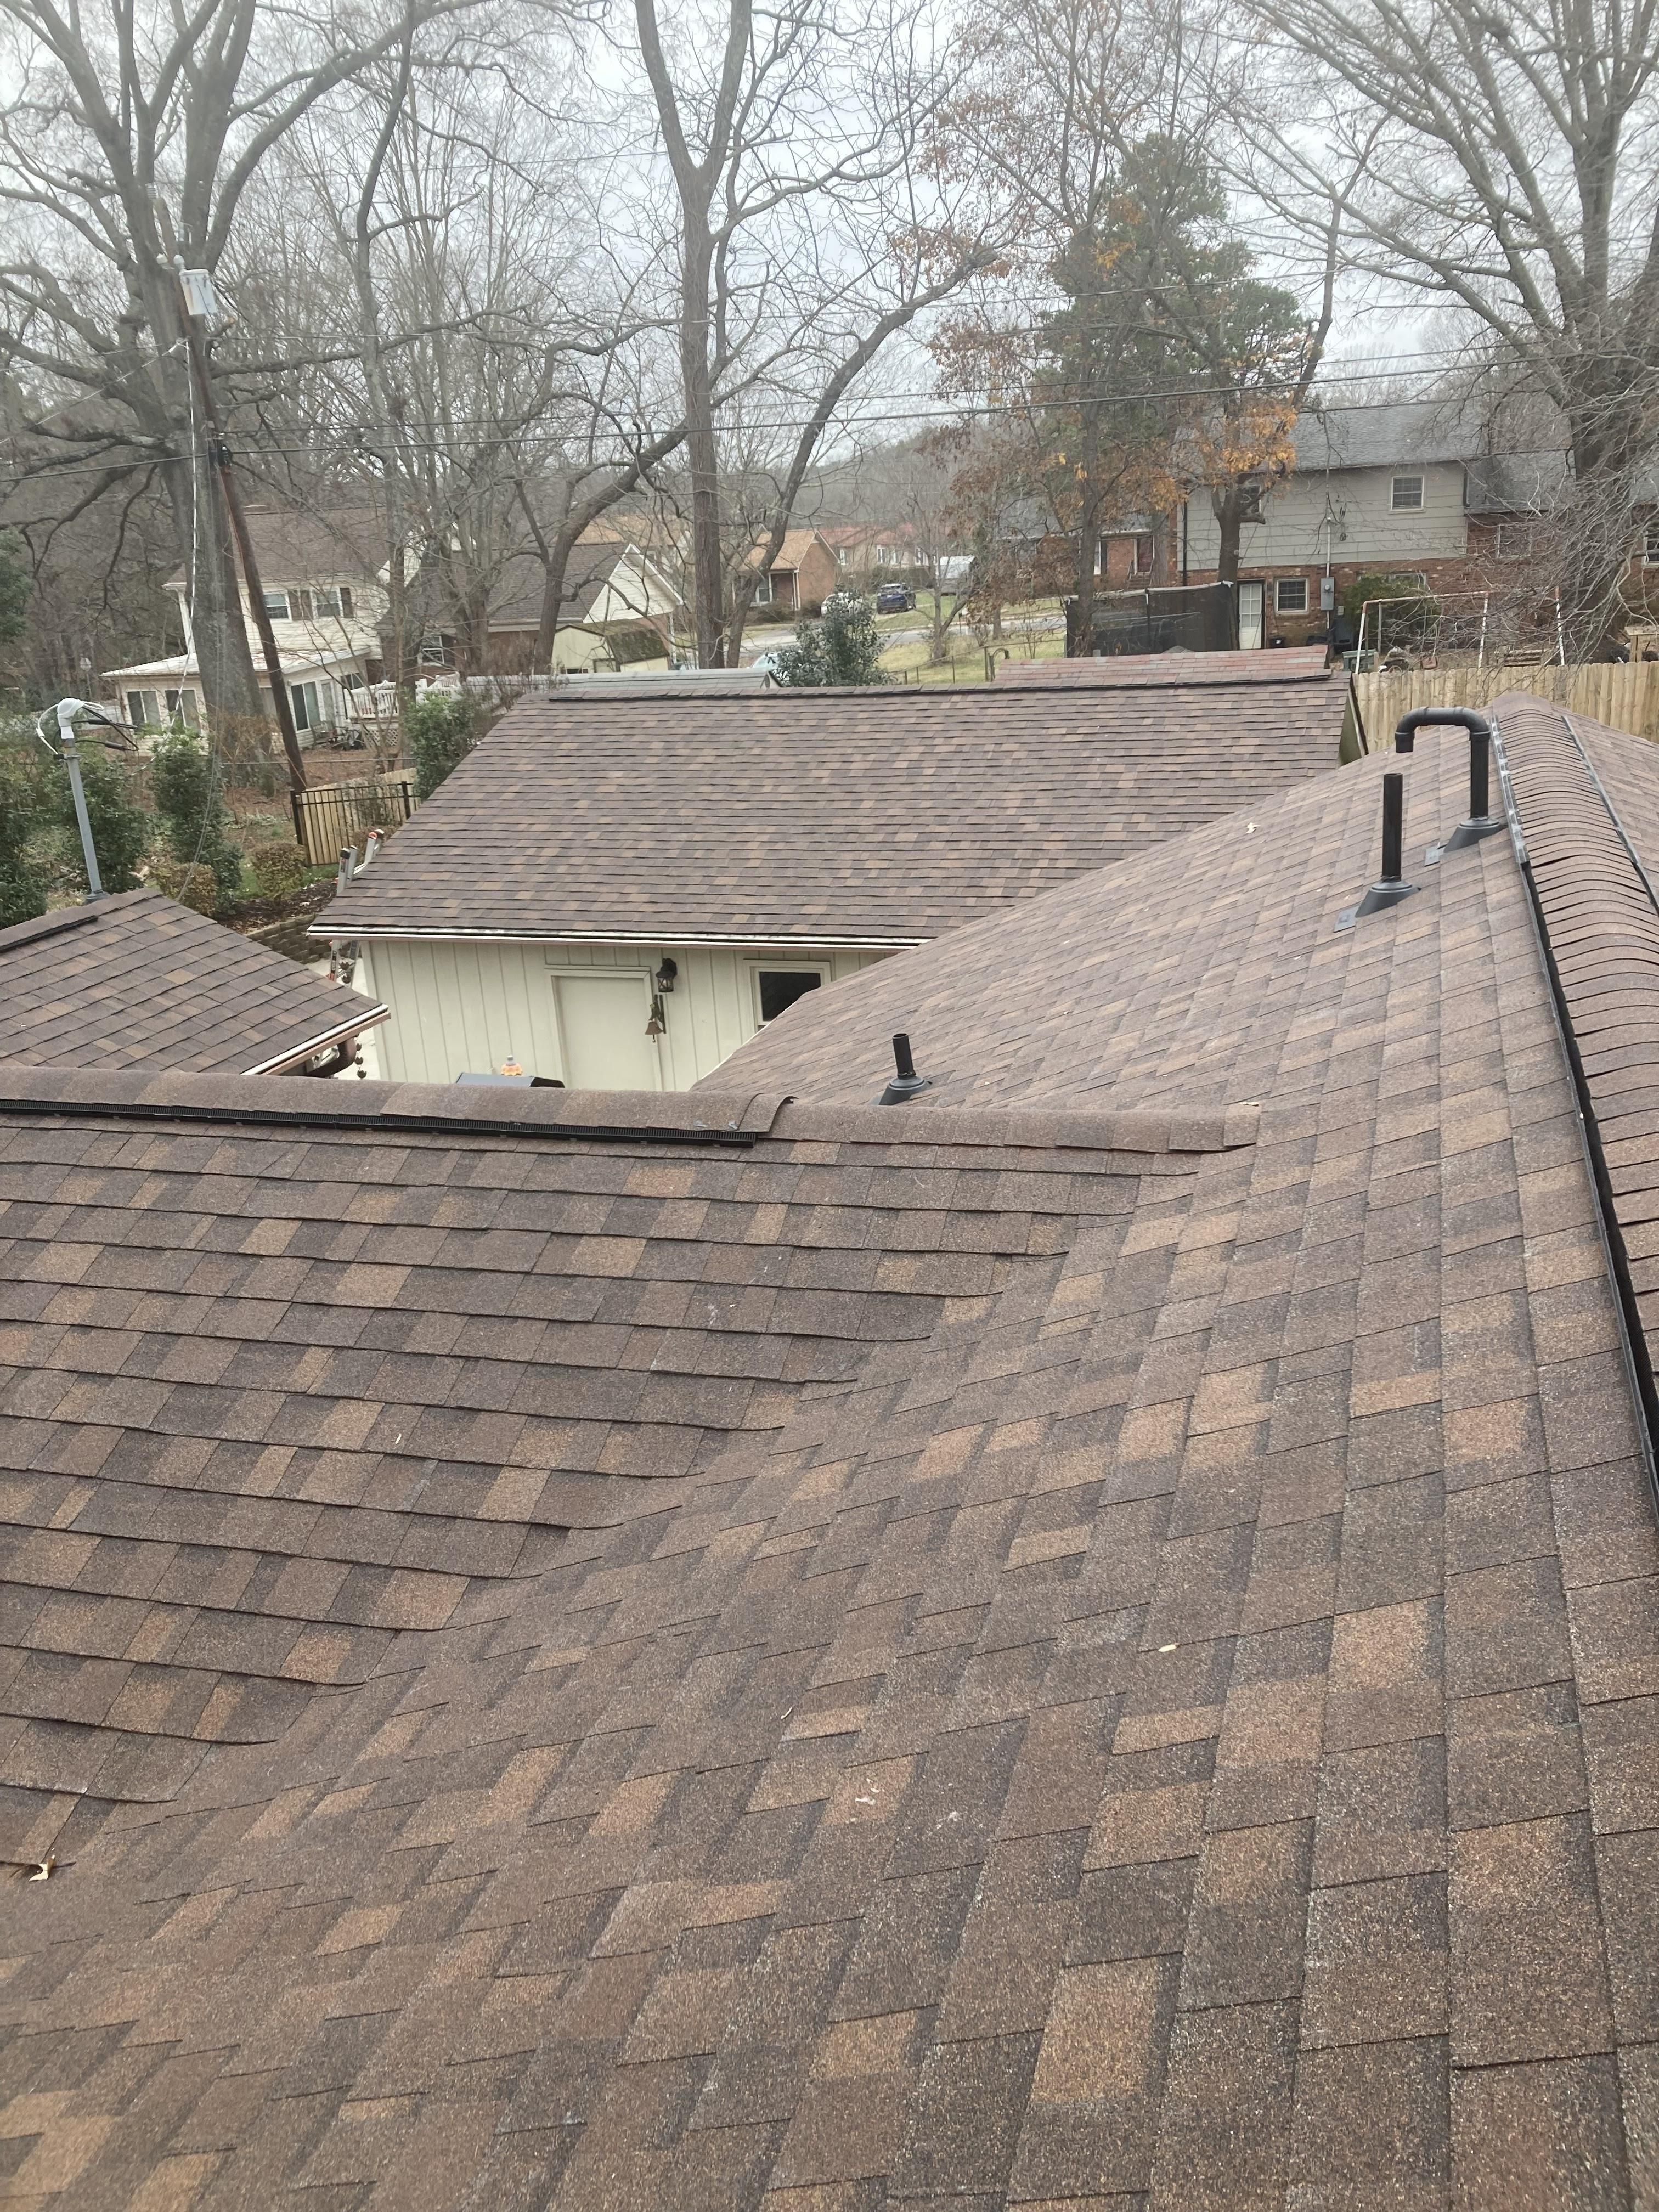 Roofing Installation for Kingdom Roofing Services in Charlotte, NC